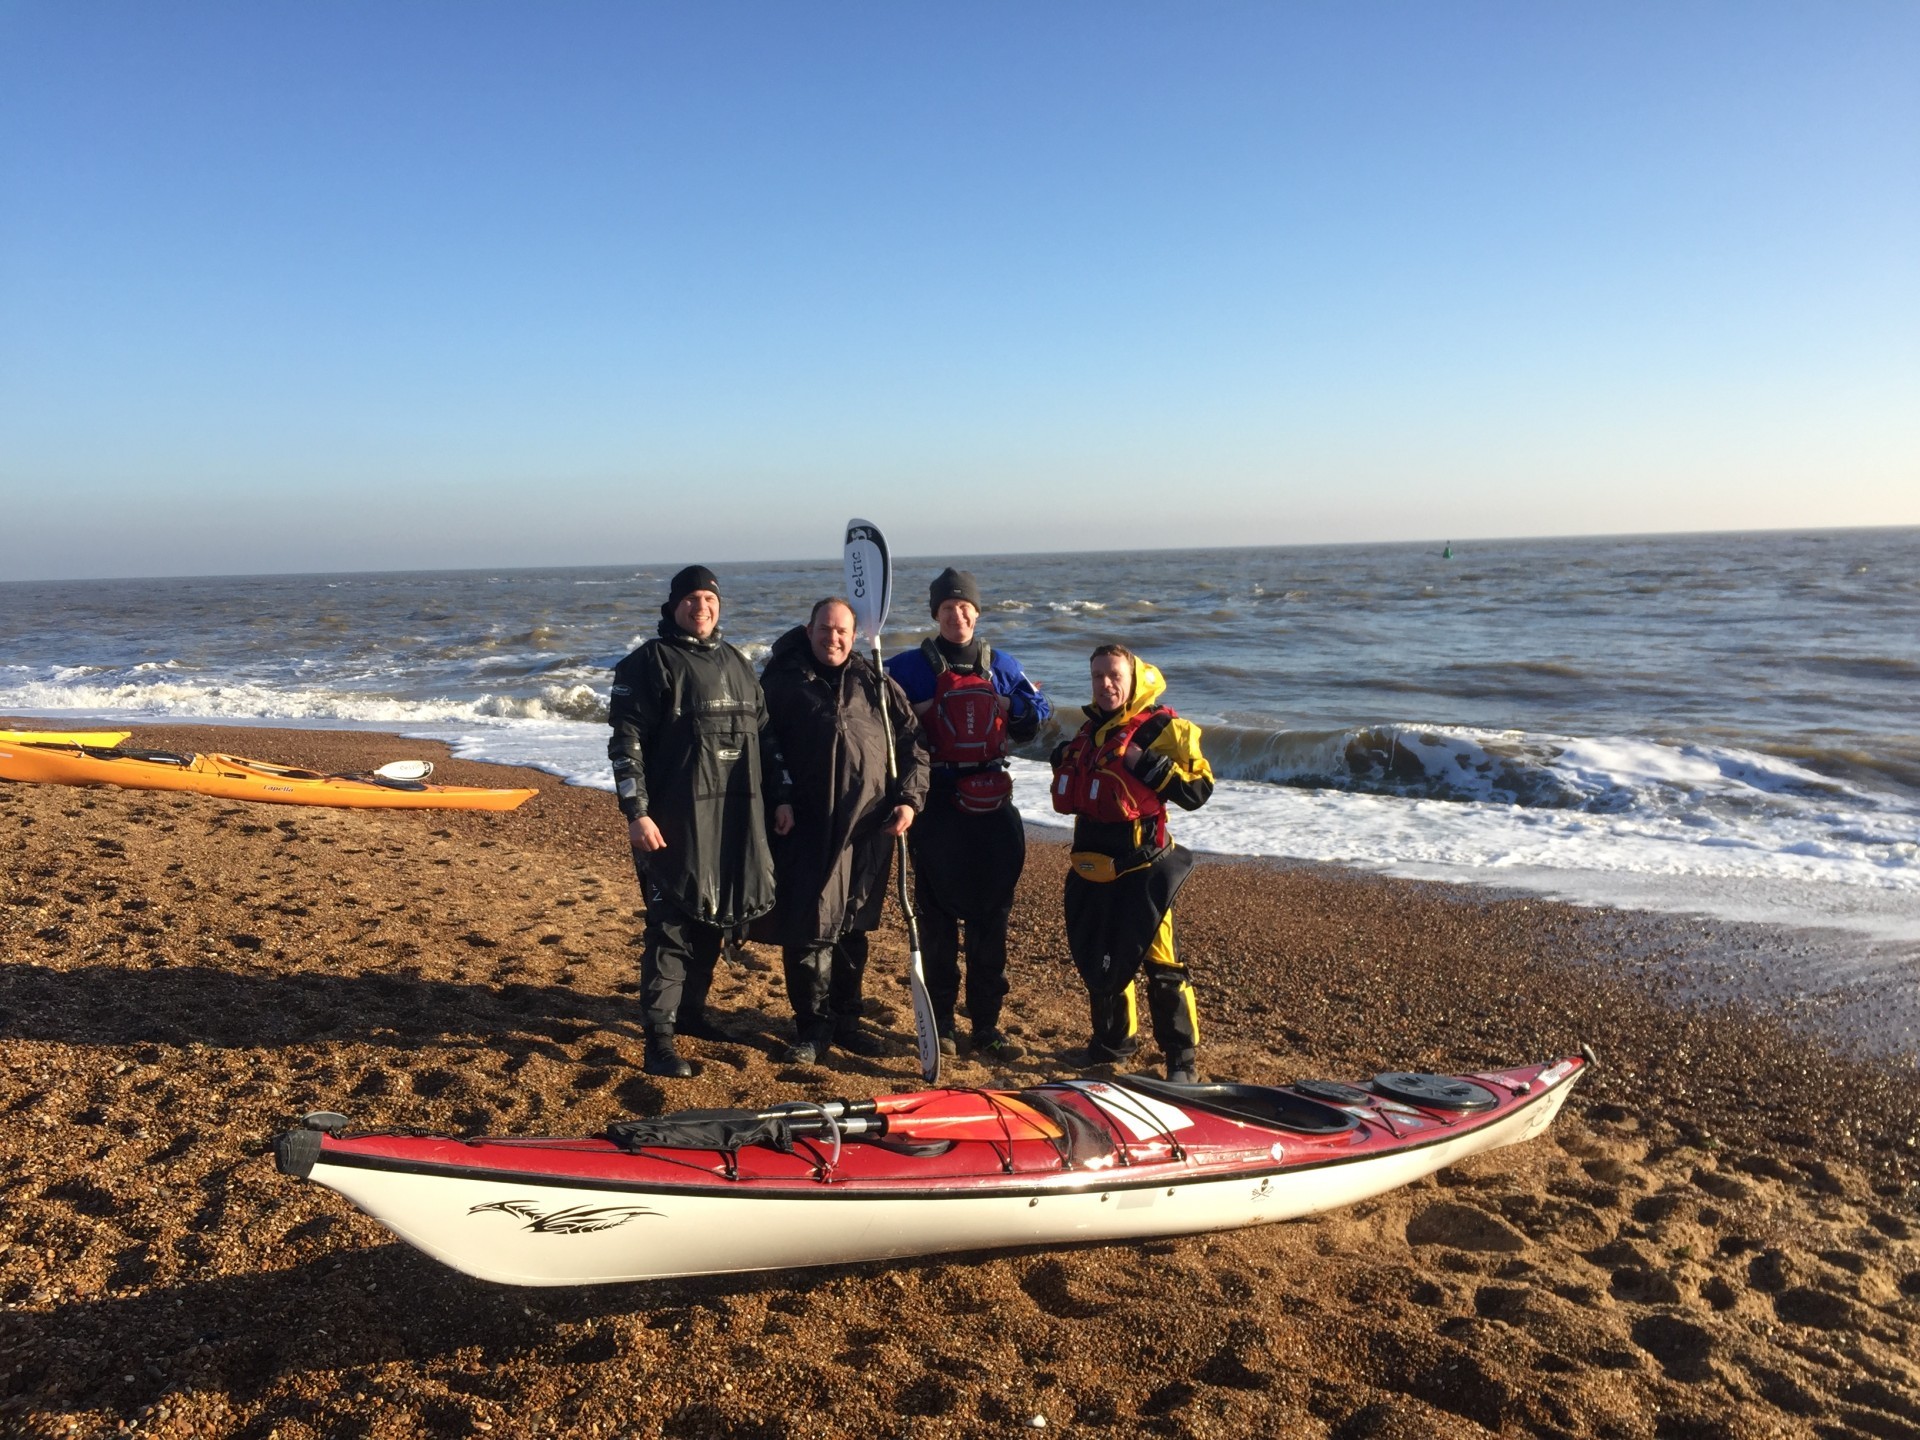 Group os sea kayakers posing together on a shingle beach with clear blue skies